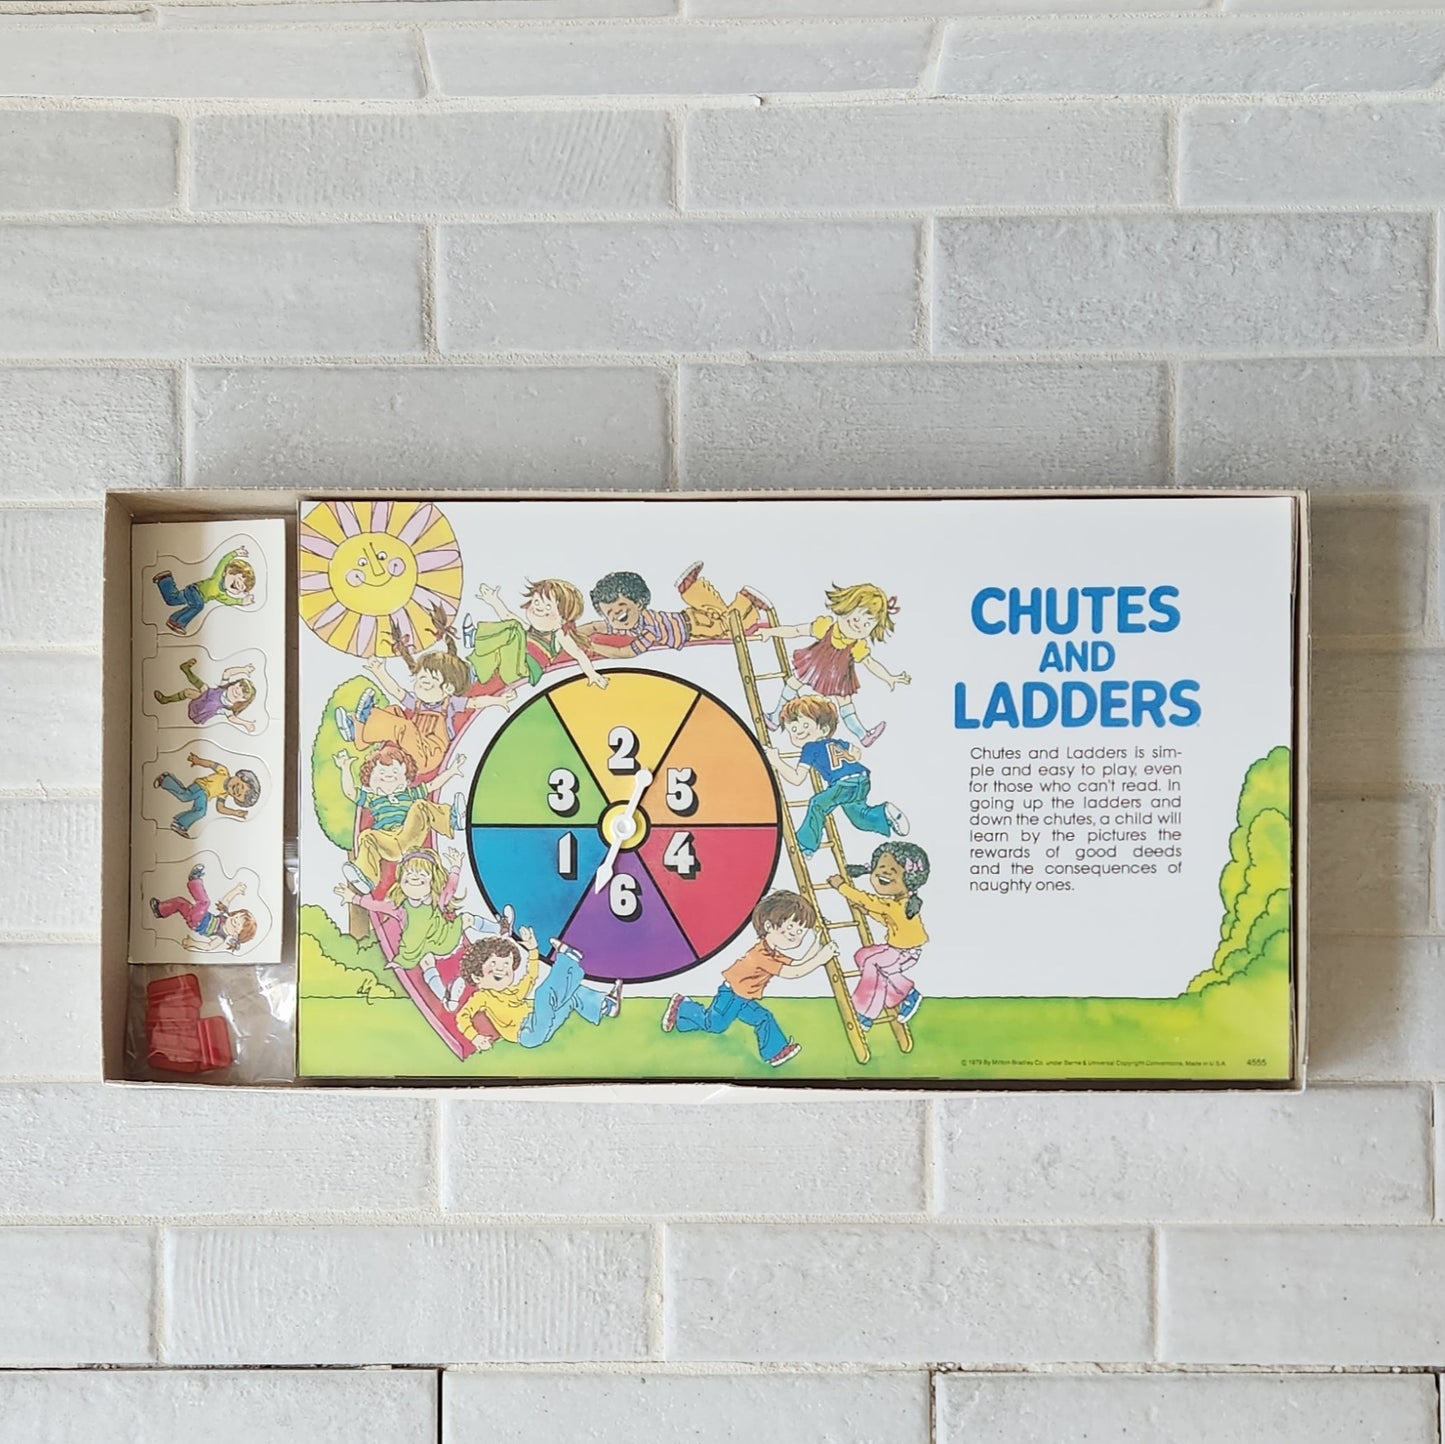 Display and Play 1979 Chutes and Ladders Handmade Framed Board Game